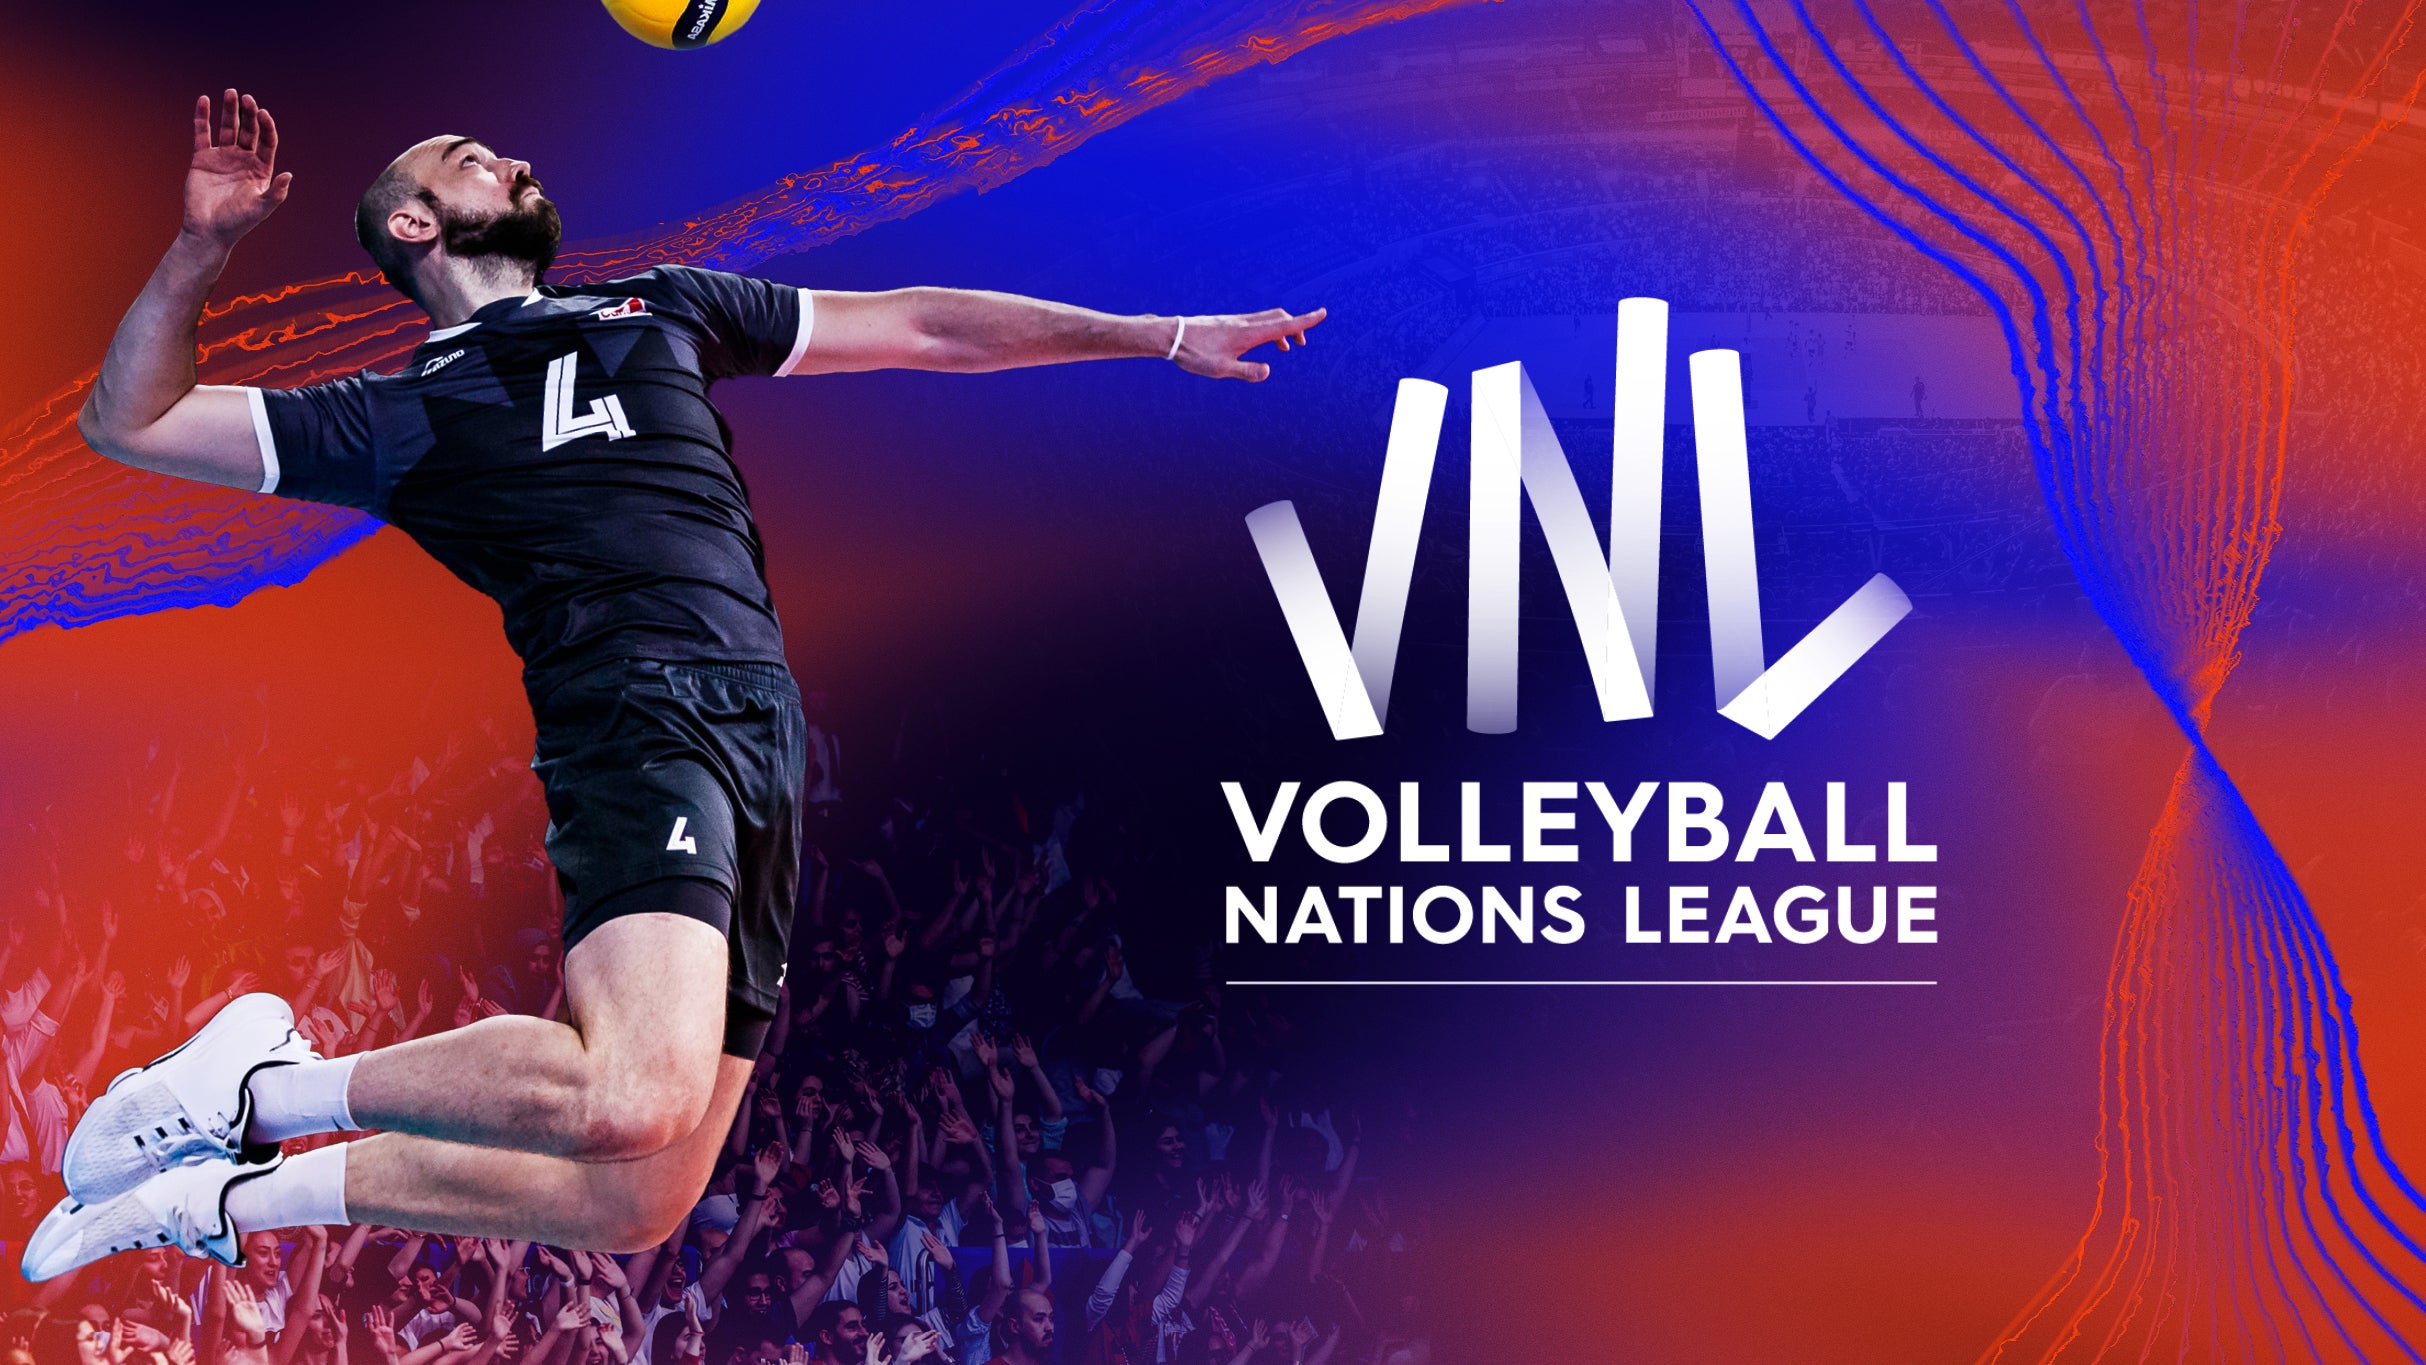 Volleyball Nations League - June 10 in Ottawa promo photo for TD Place Insider presale offer code